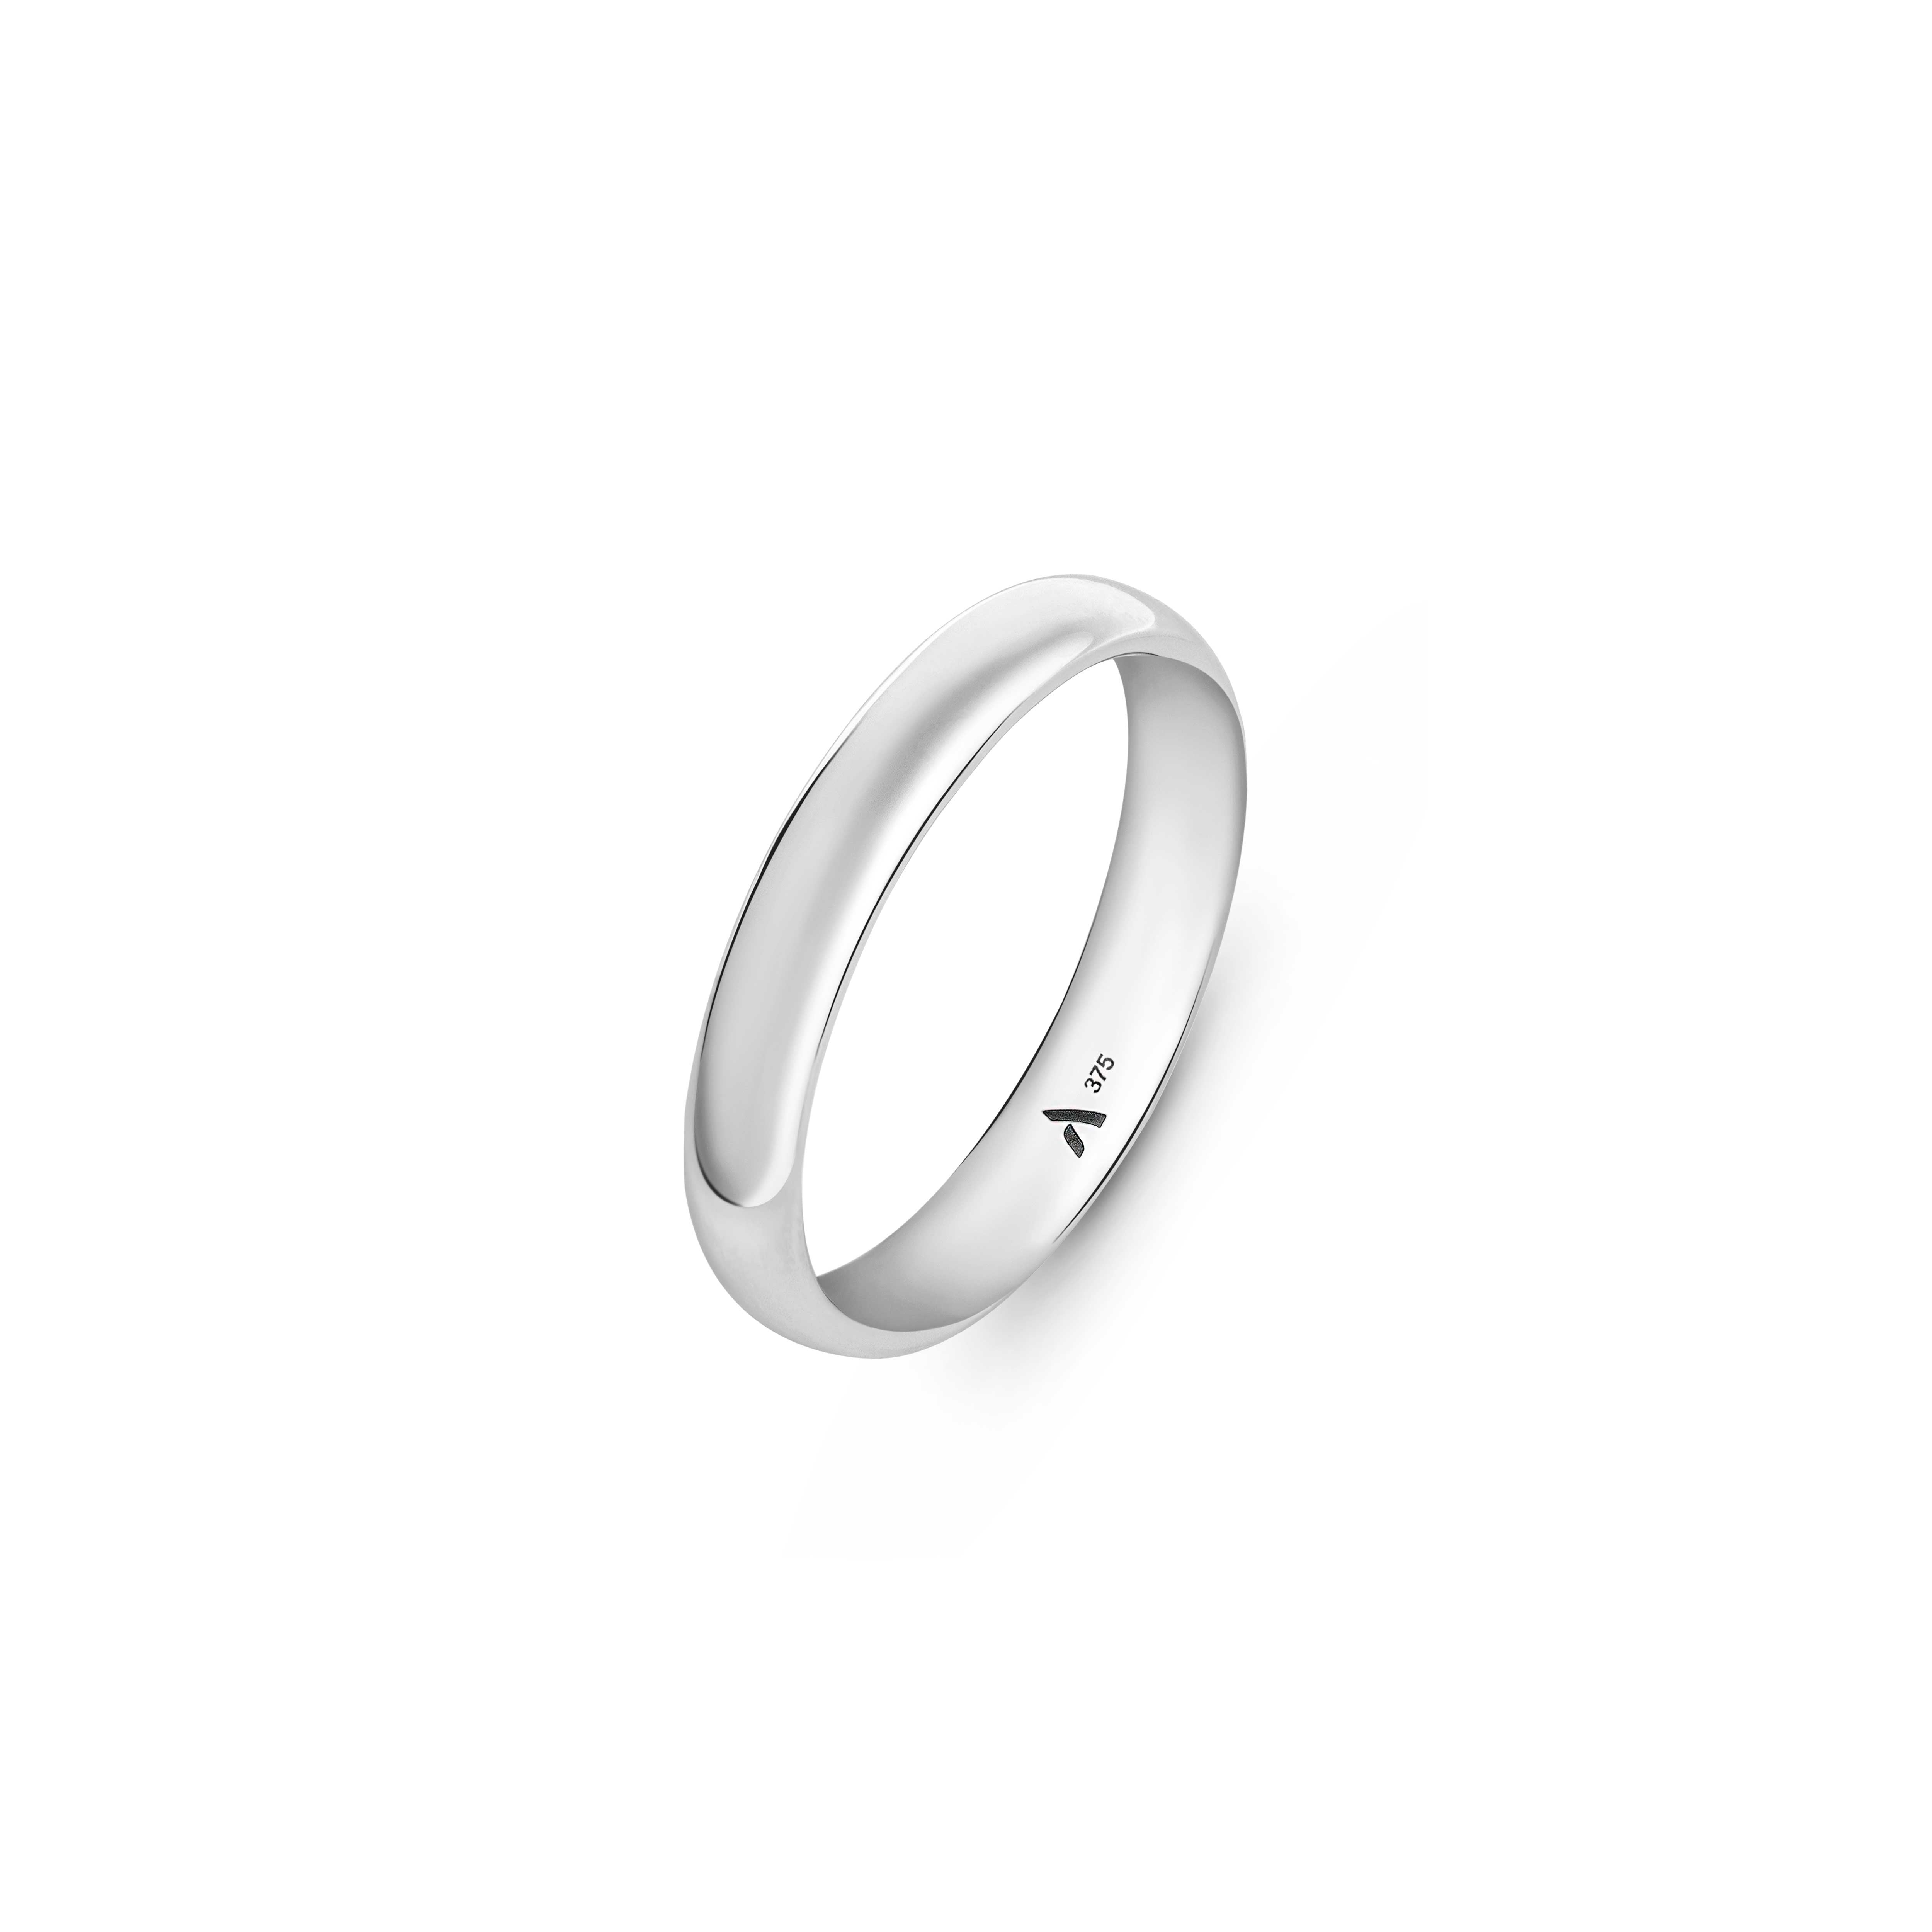 A 9ct White gold wedding band 3.5mm placed on a white background 